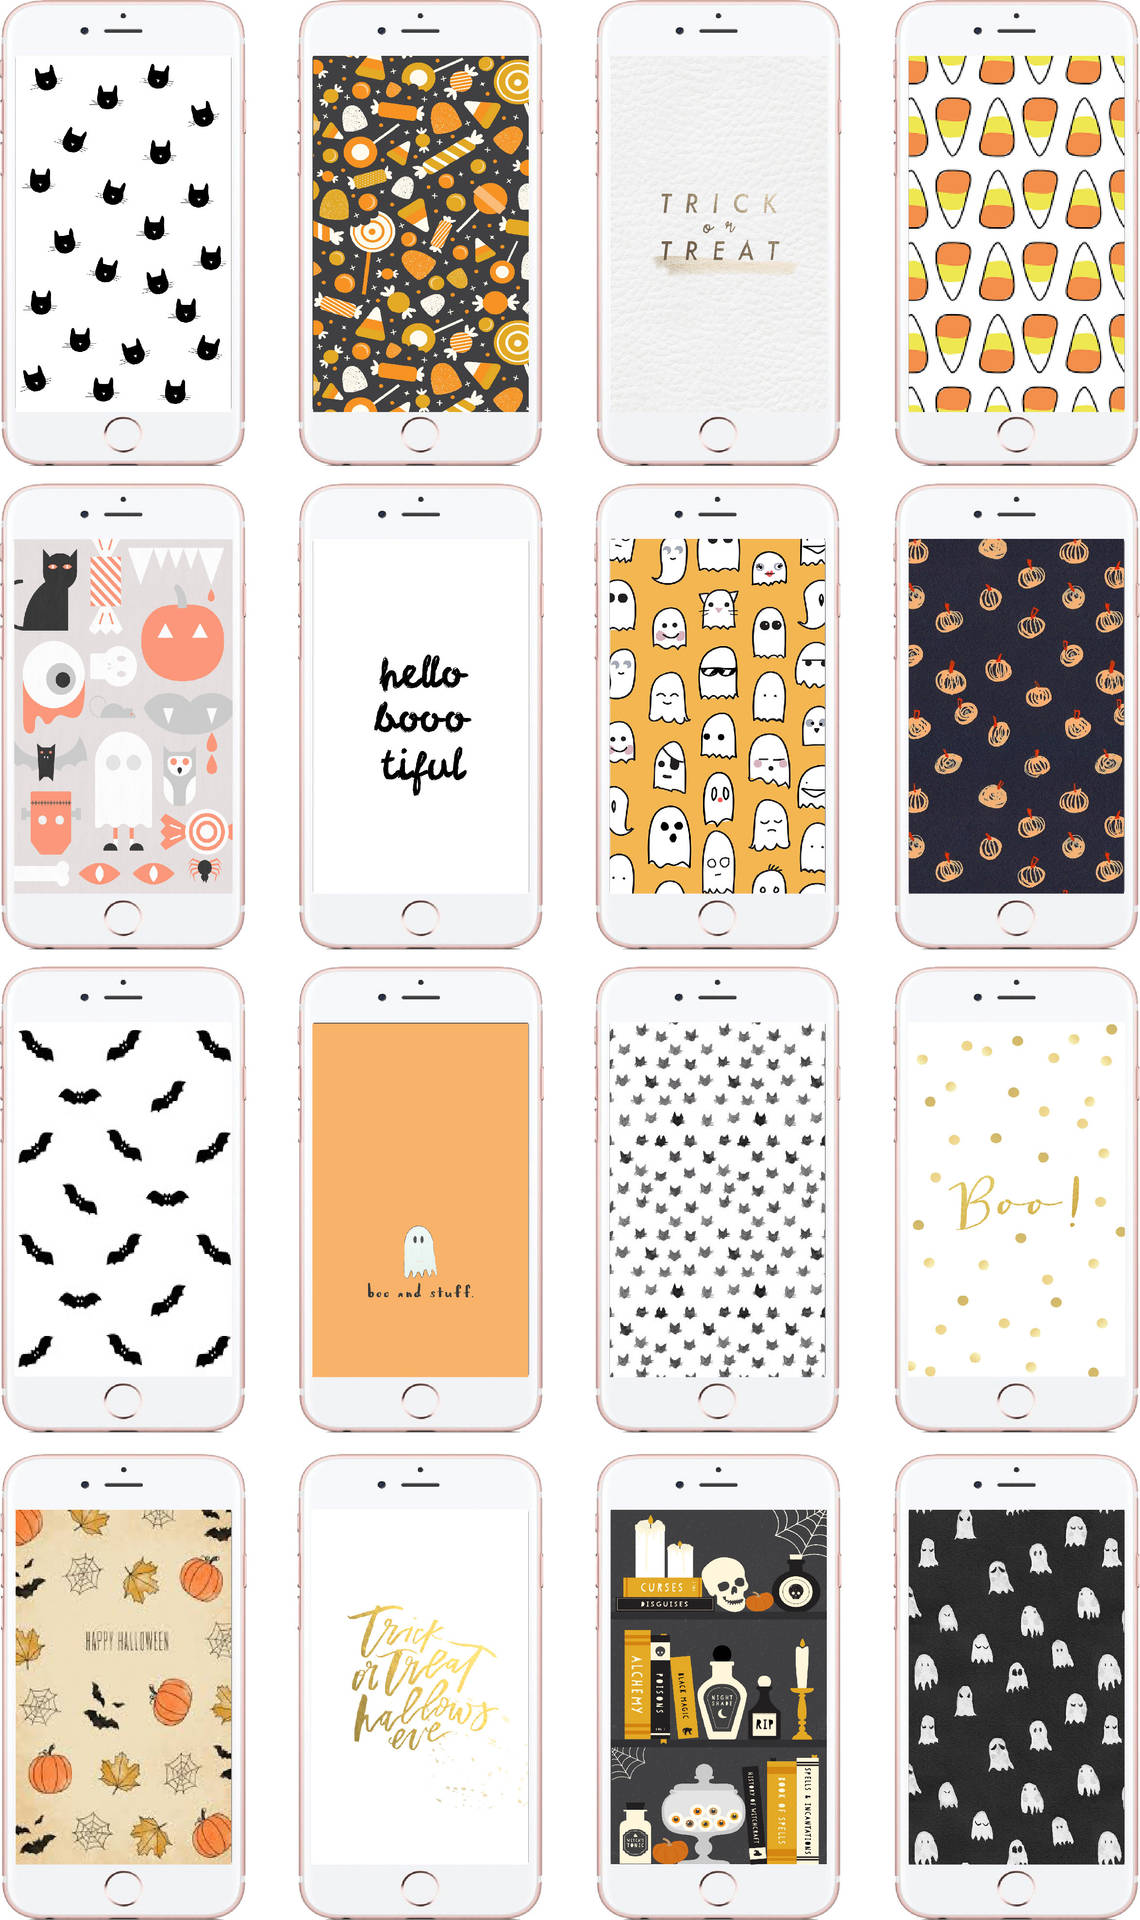 Cute Halloween Iphone Templates Background